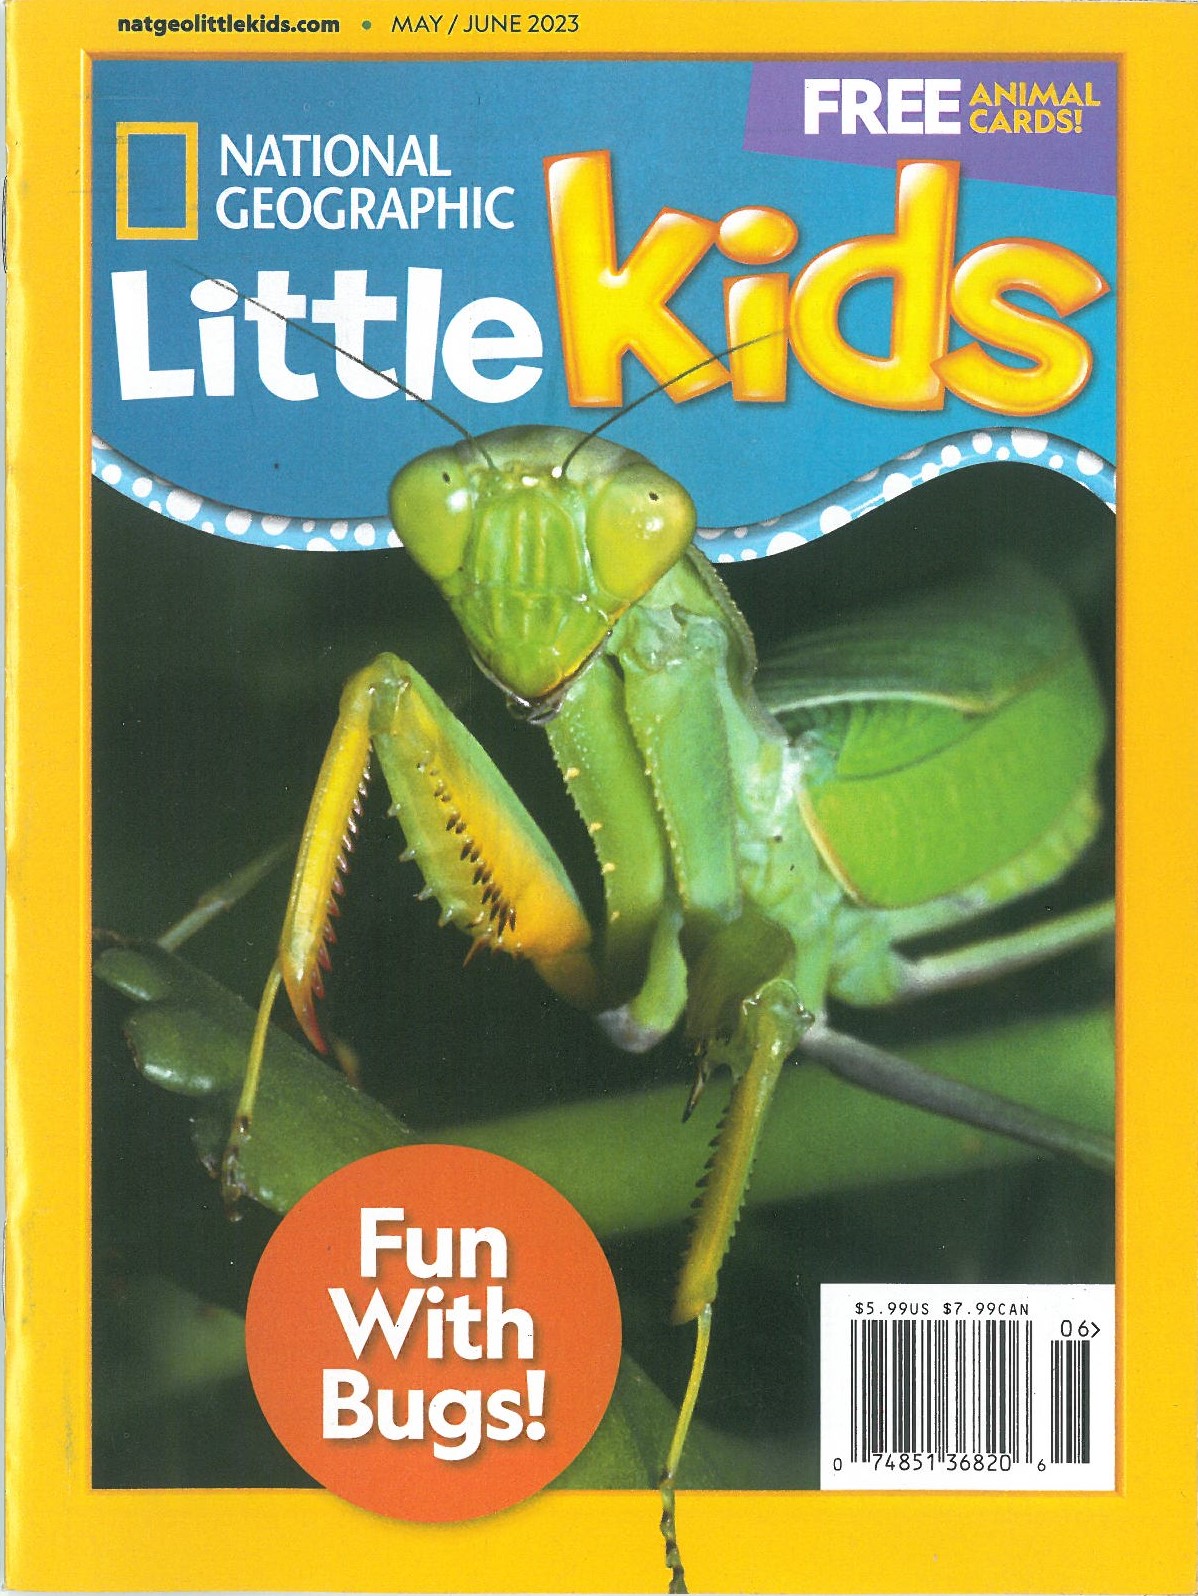 NATIONAL GEOGRAPHIC LITTLE KIDS ISSUE OF JANUARY/FEBRUARY 2023